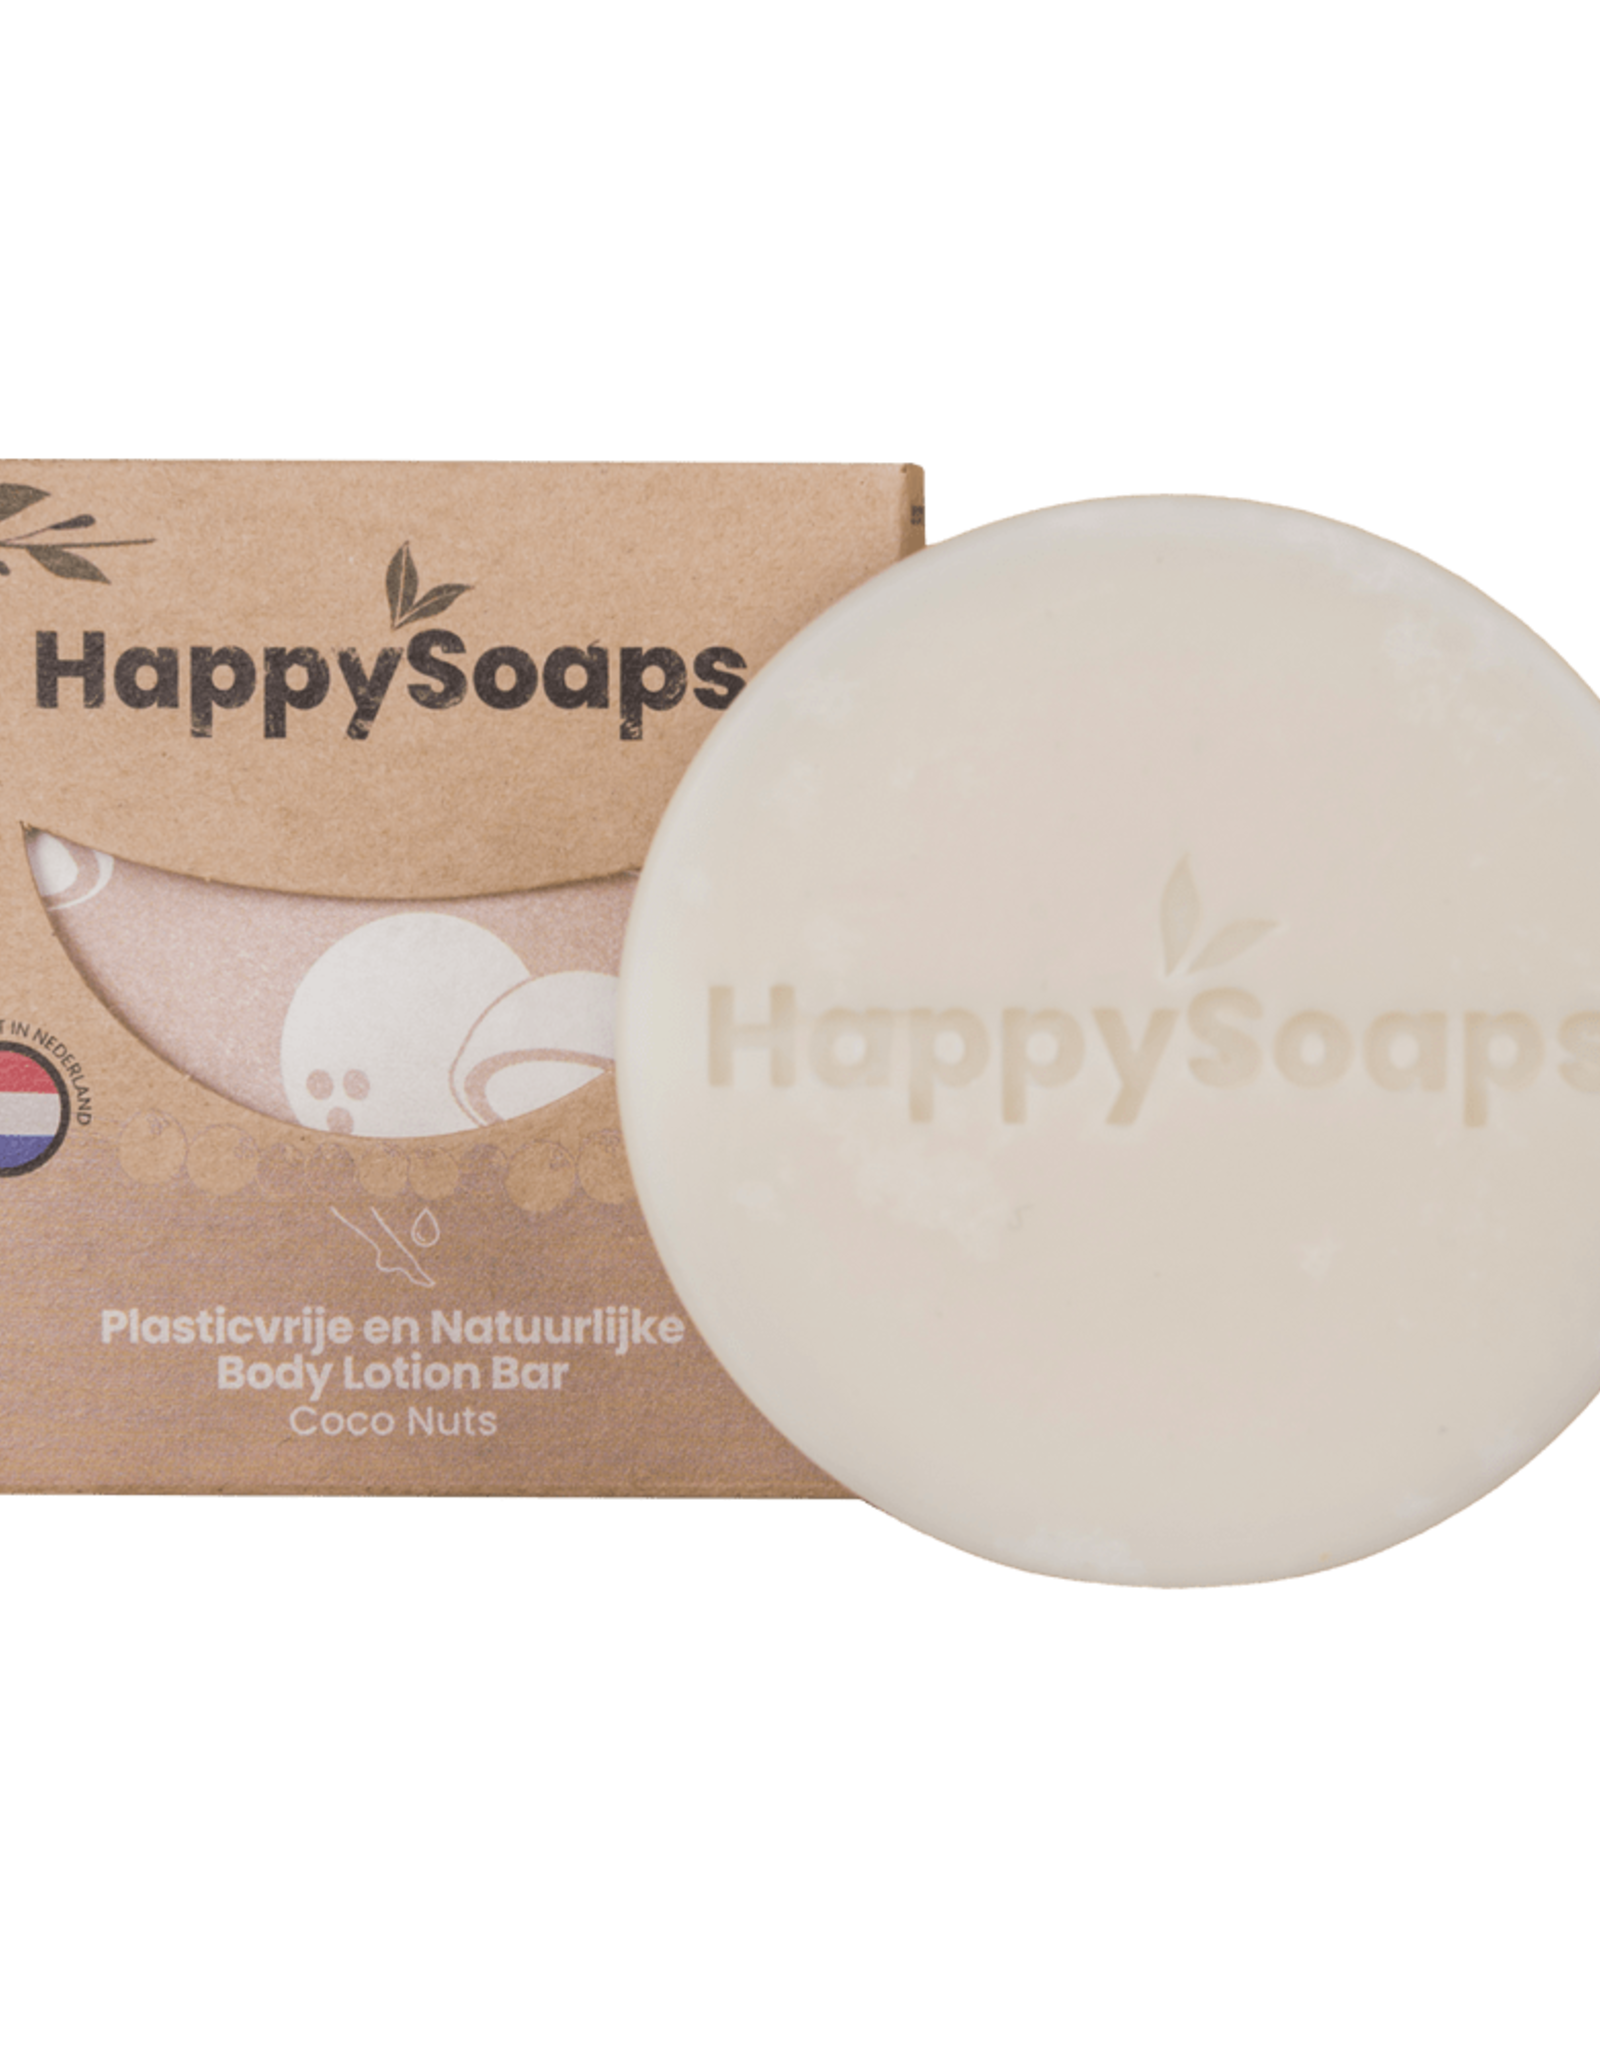 HappySoaps Body Lotion Bar Coco Nuts - HappySoaps